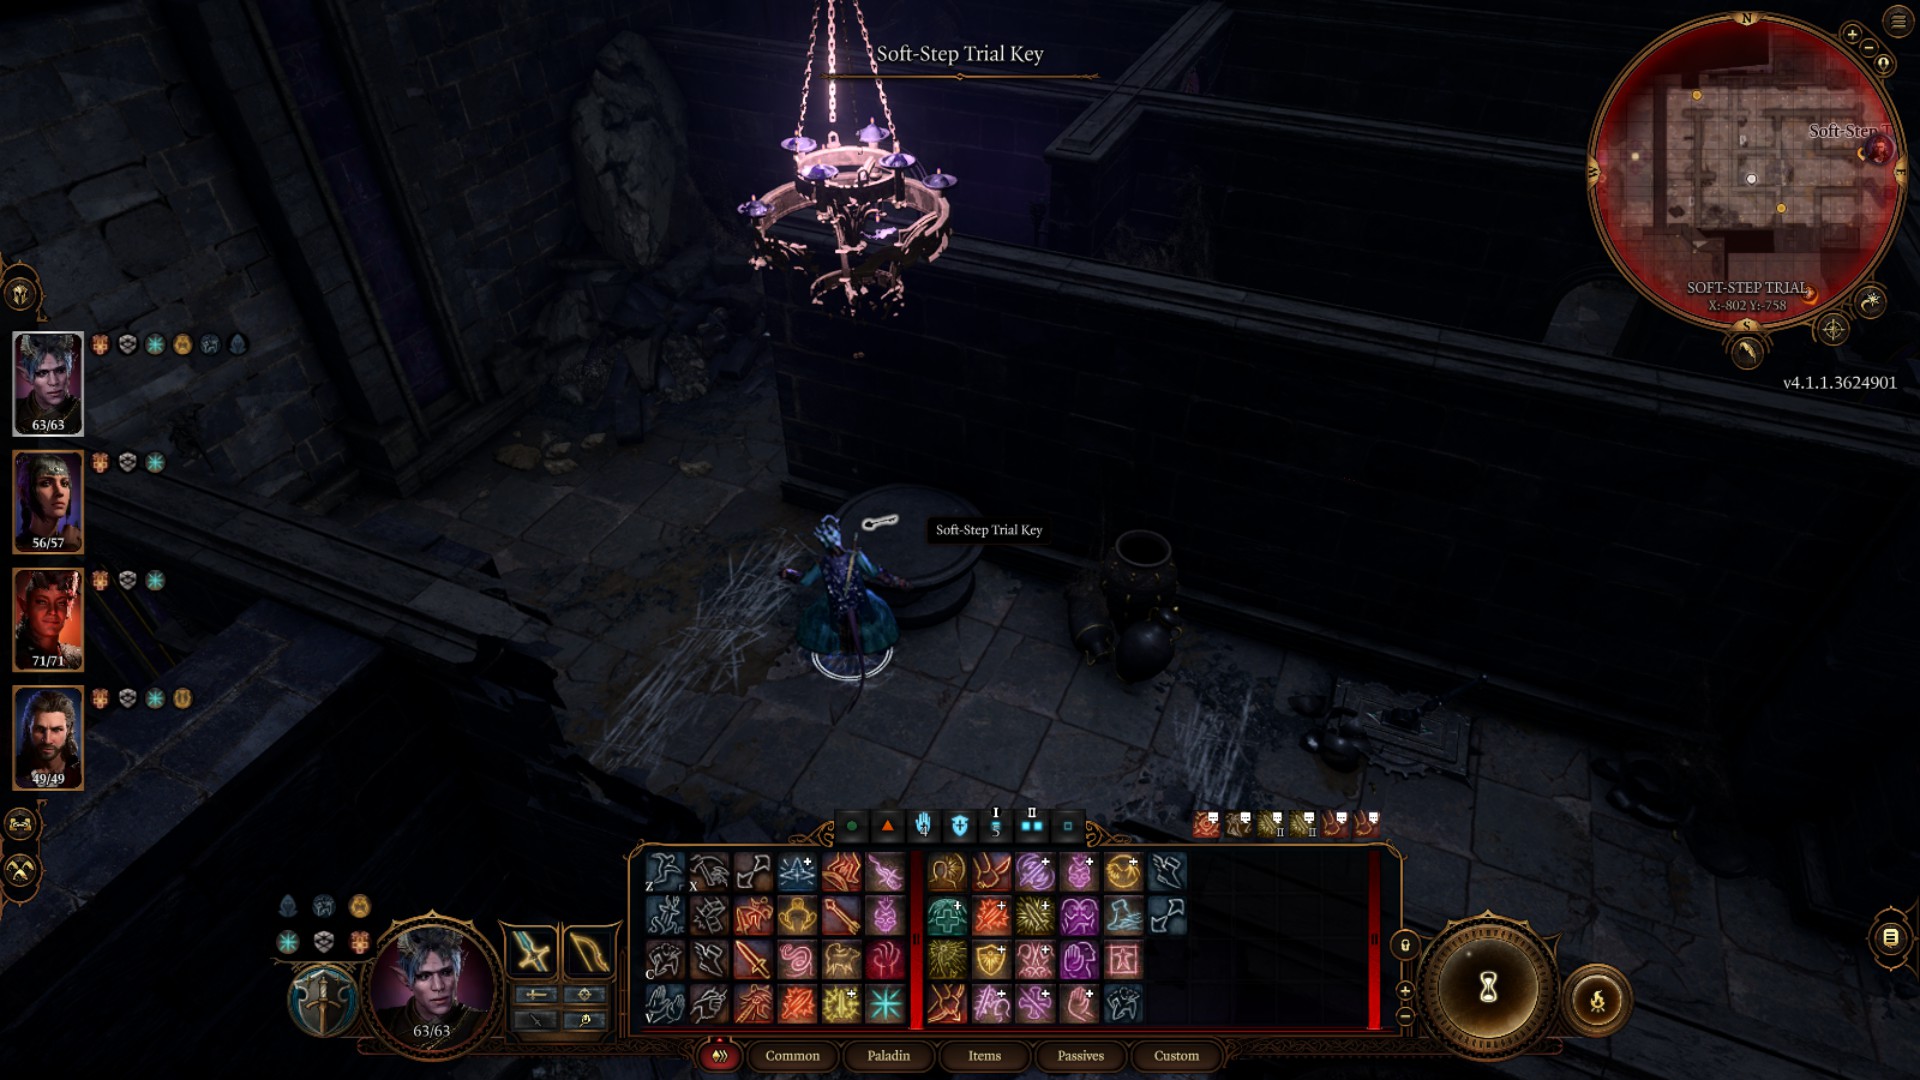 An image showing the location of the Soft-Step Key in Baldur's Gate 3.